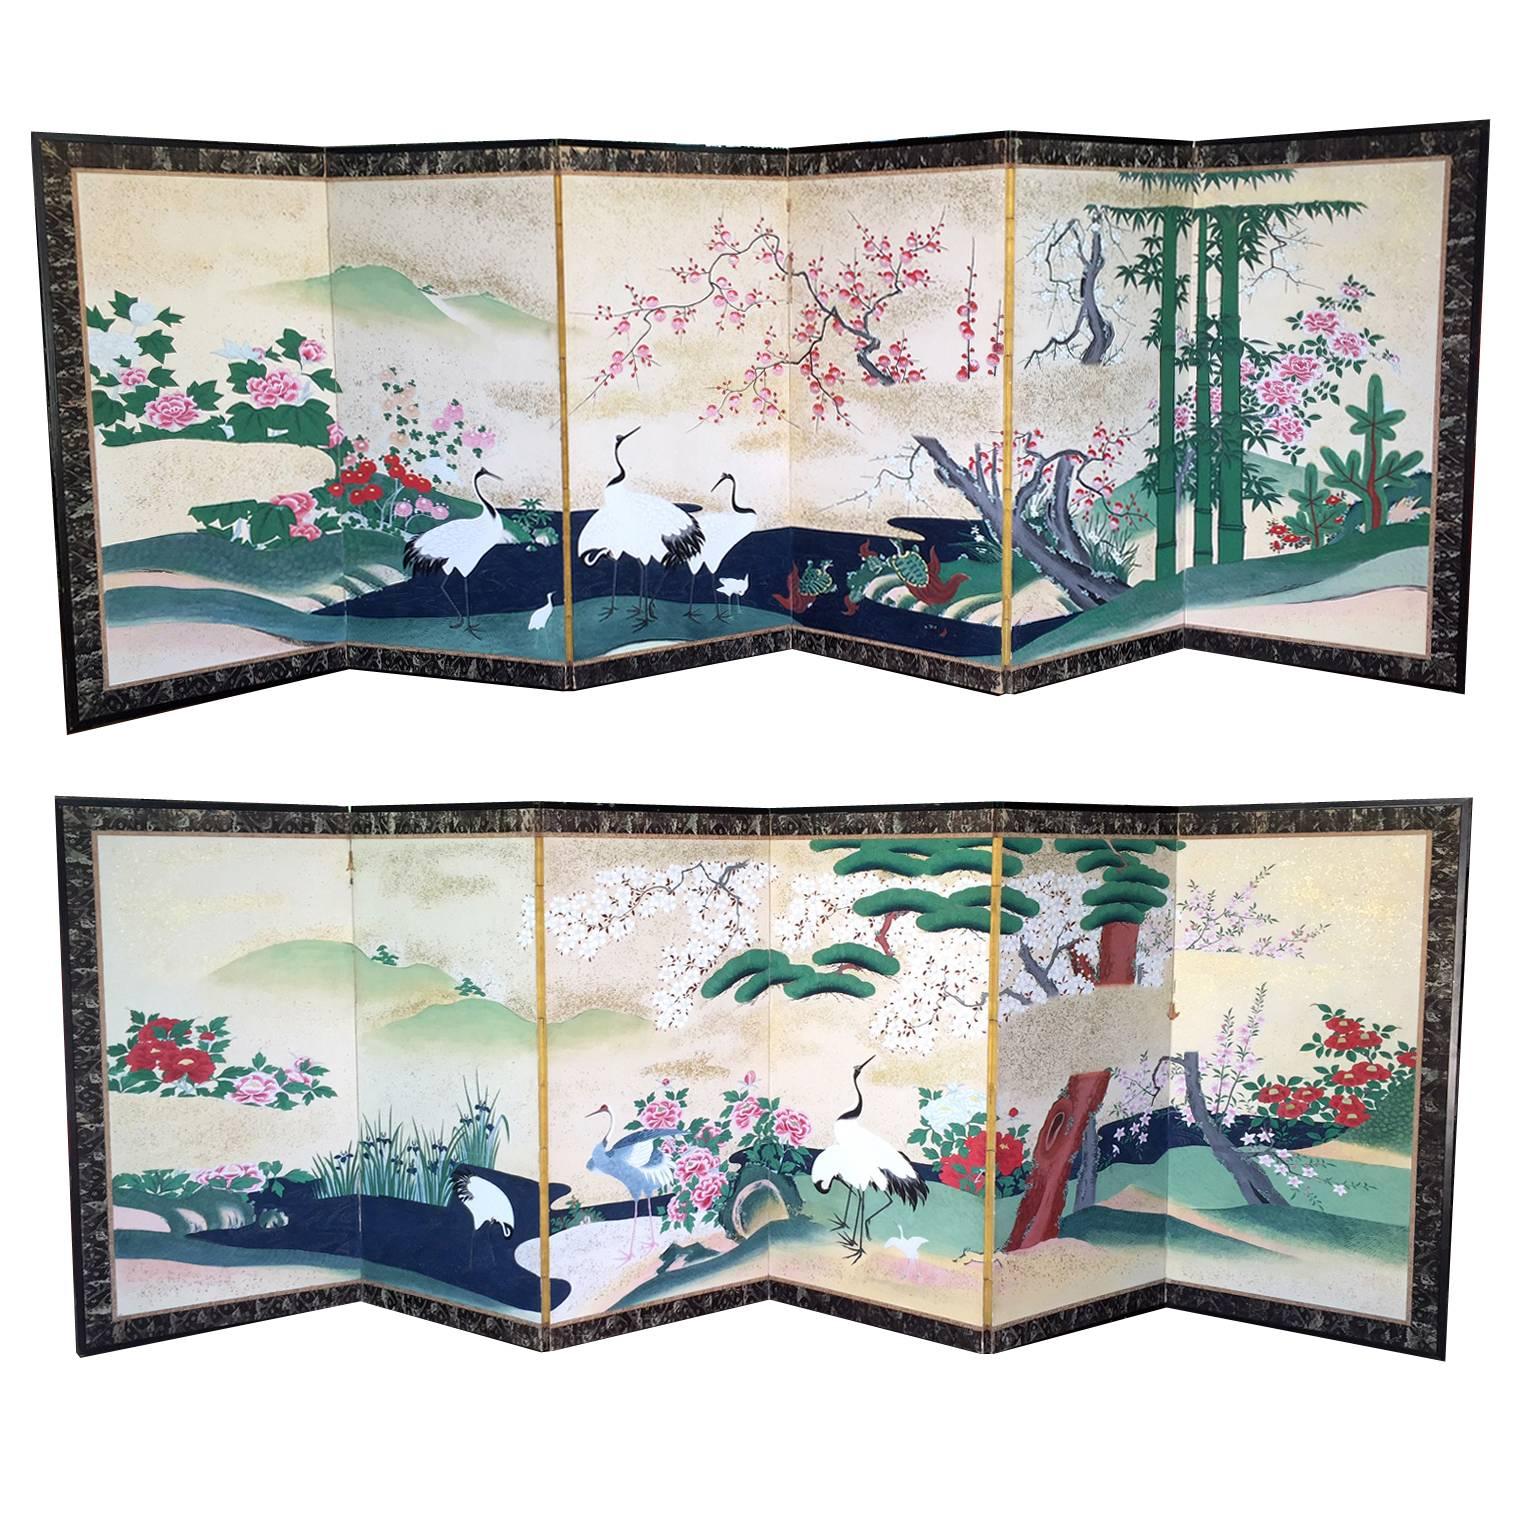 Pair of Rare Antique Japanese Folding Screens with Provenance